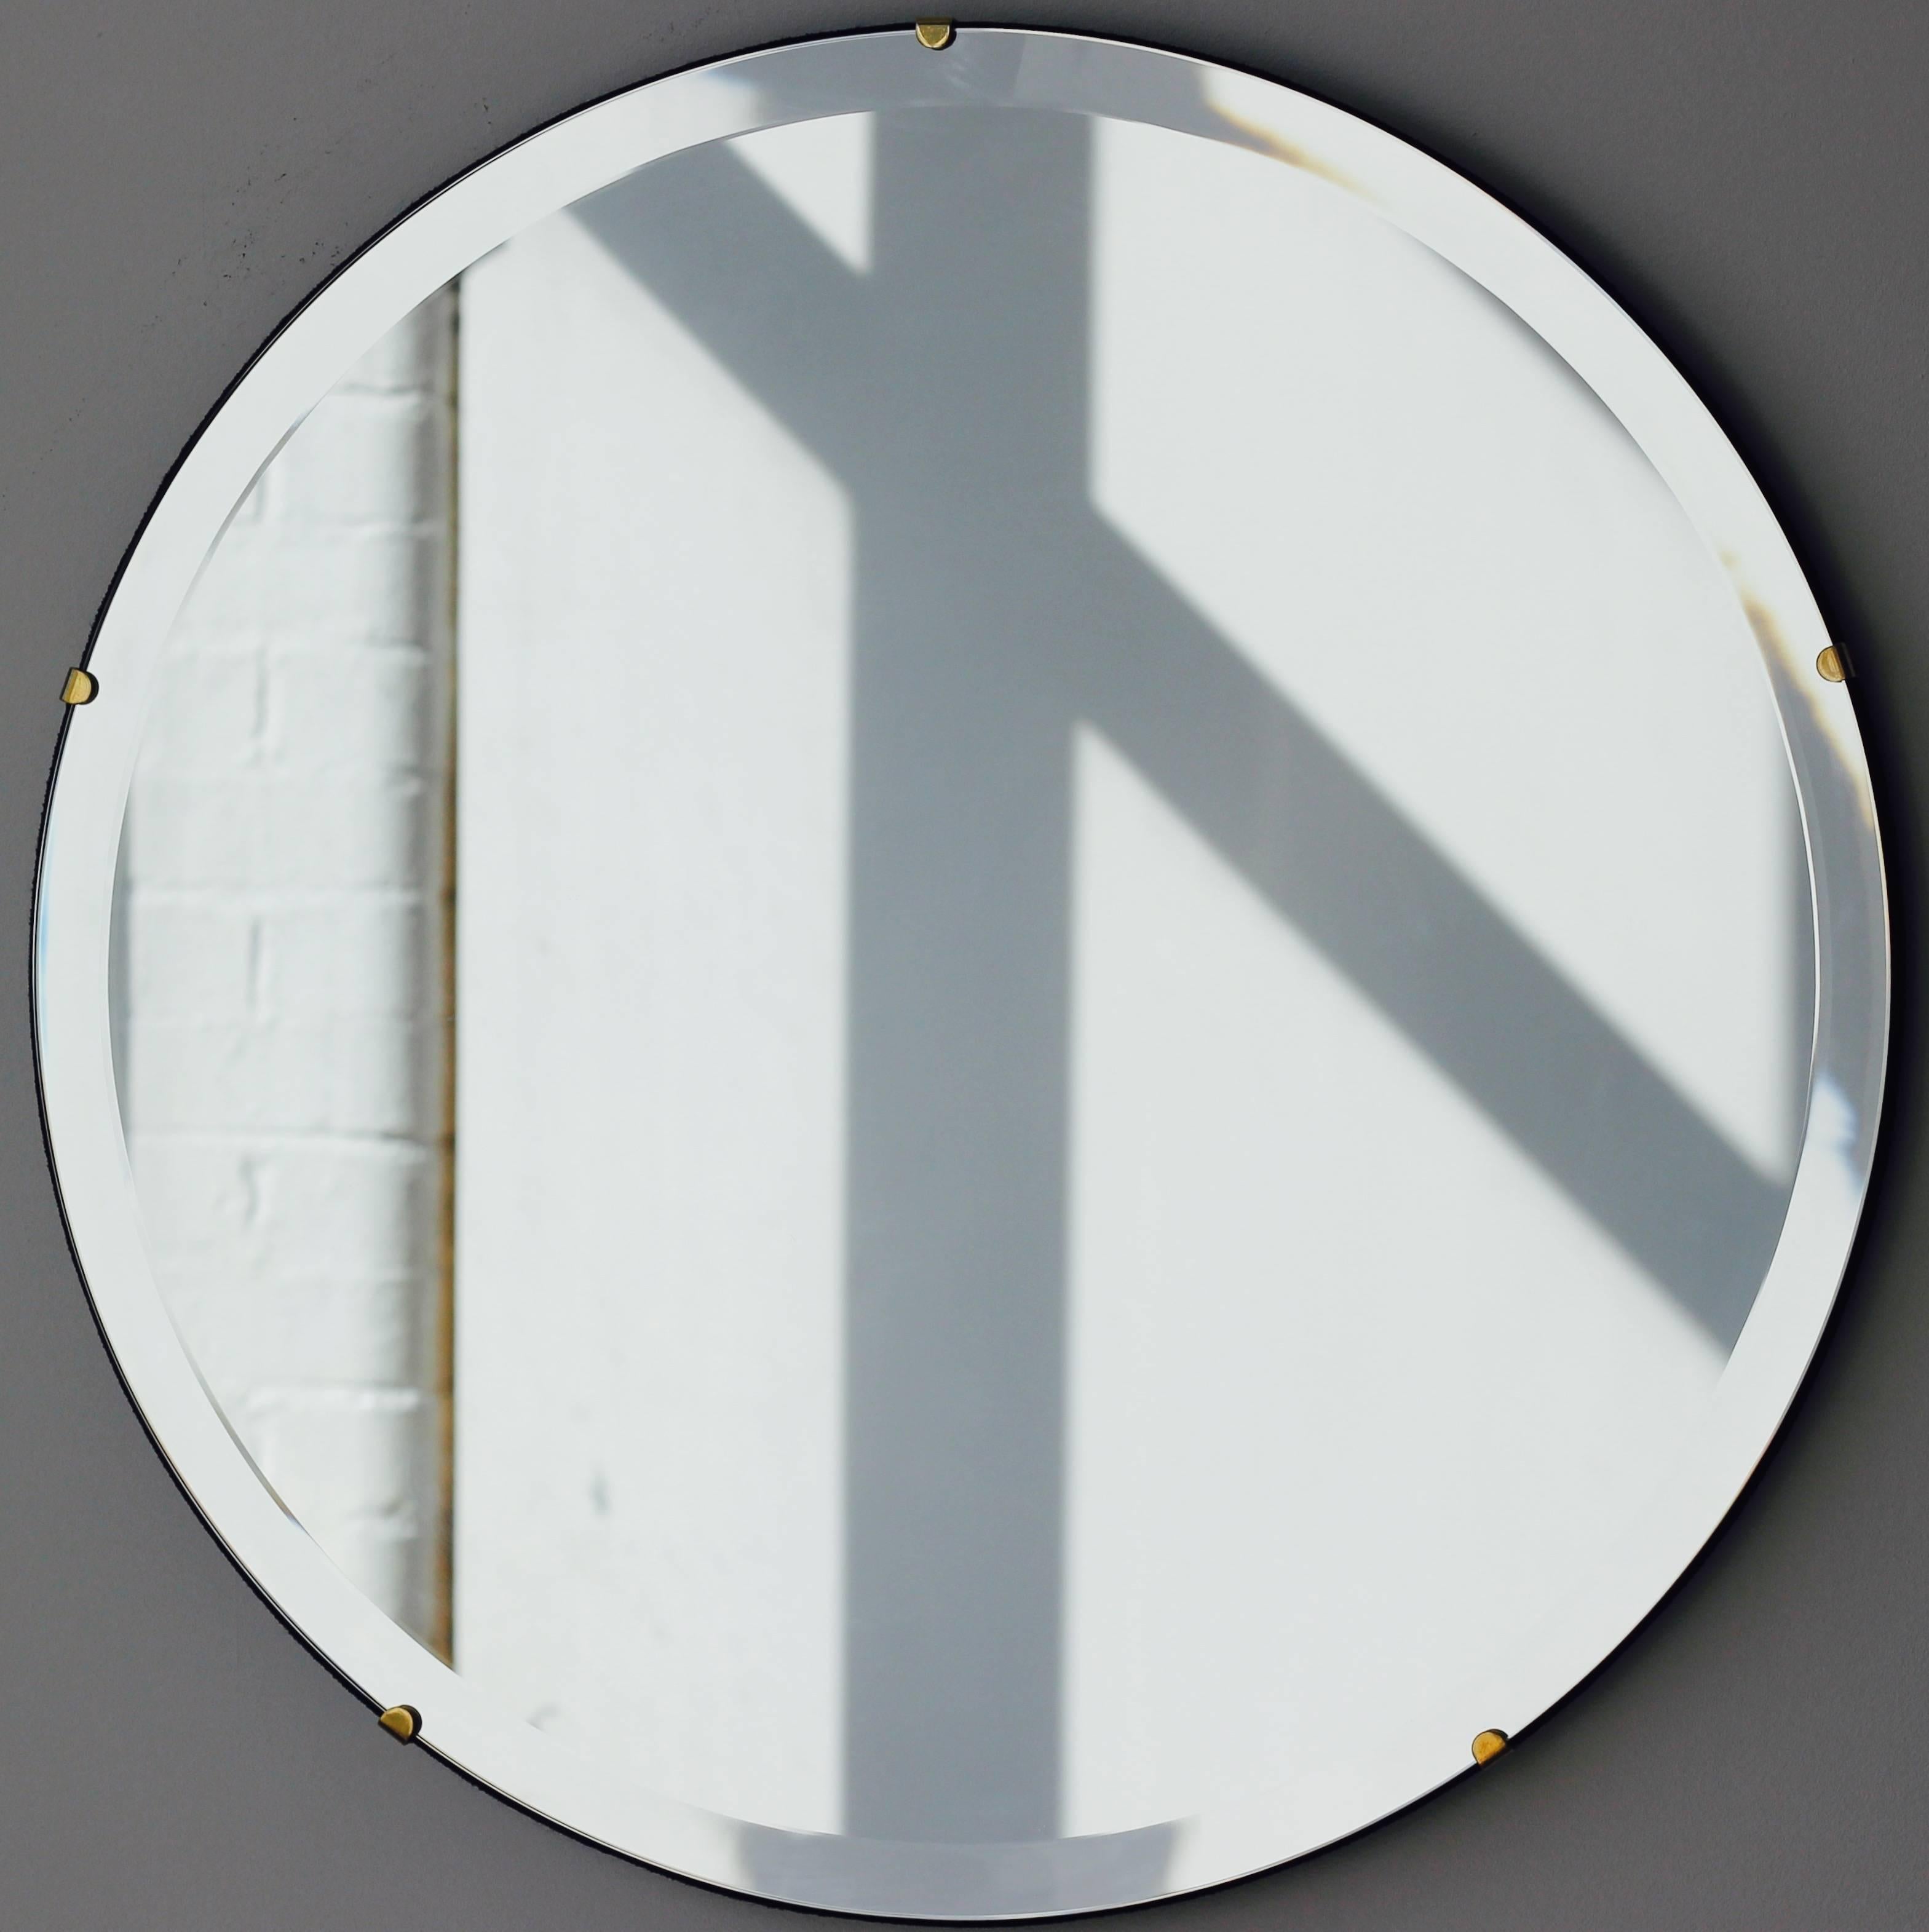 Art Deco Orbis™ round frameless mirror with an elegant bevel, velvet backing and optional brass clips. Designed and handcrafted in London, UK.

Our mirrors are designed with an integrated French cleat (split batten) system that ensures the mirror is